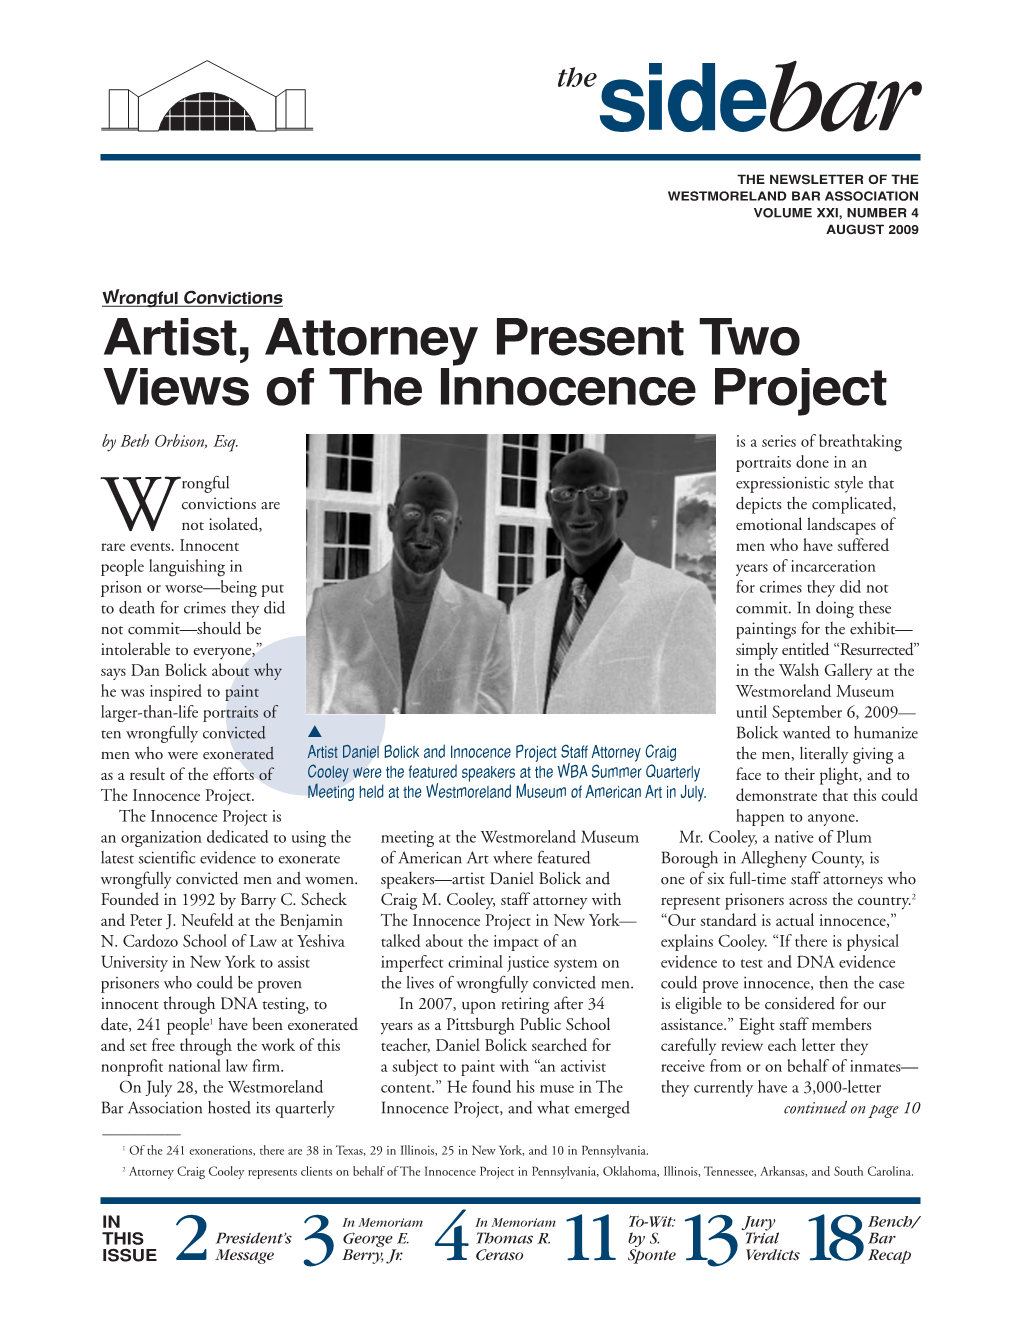 Artist, Attorney Present Two Views of the Innocence Project by Beth Orbison, Esq